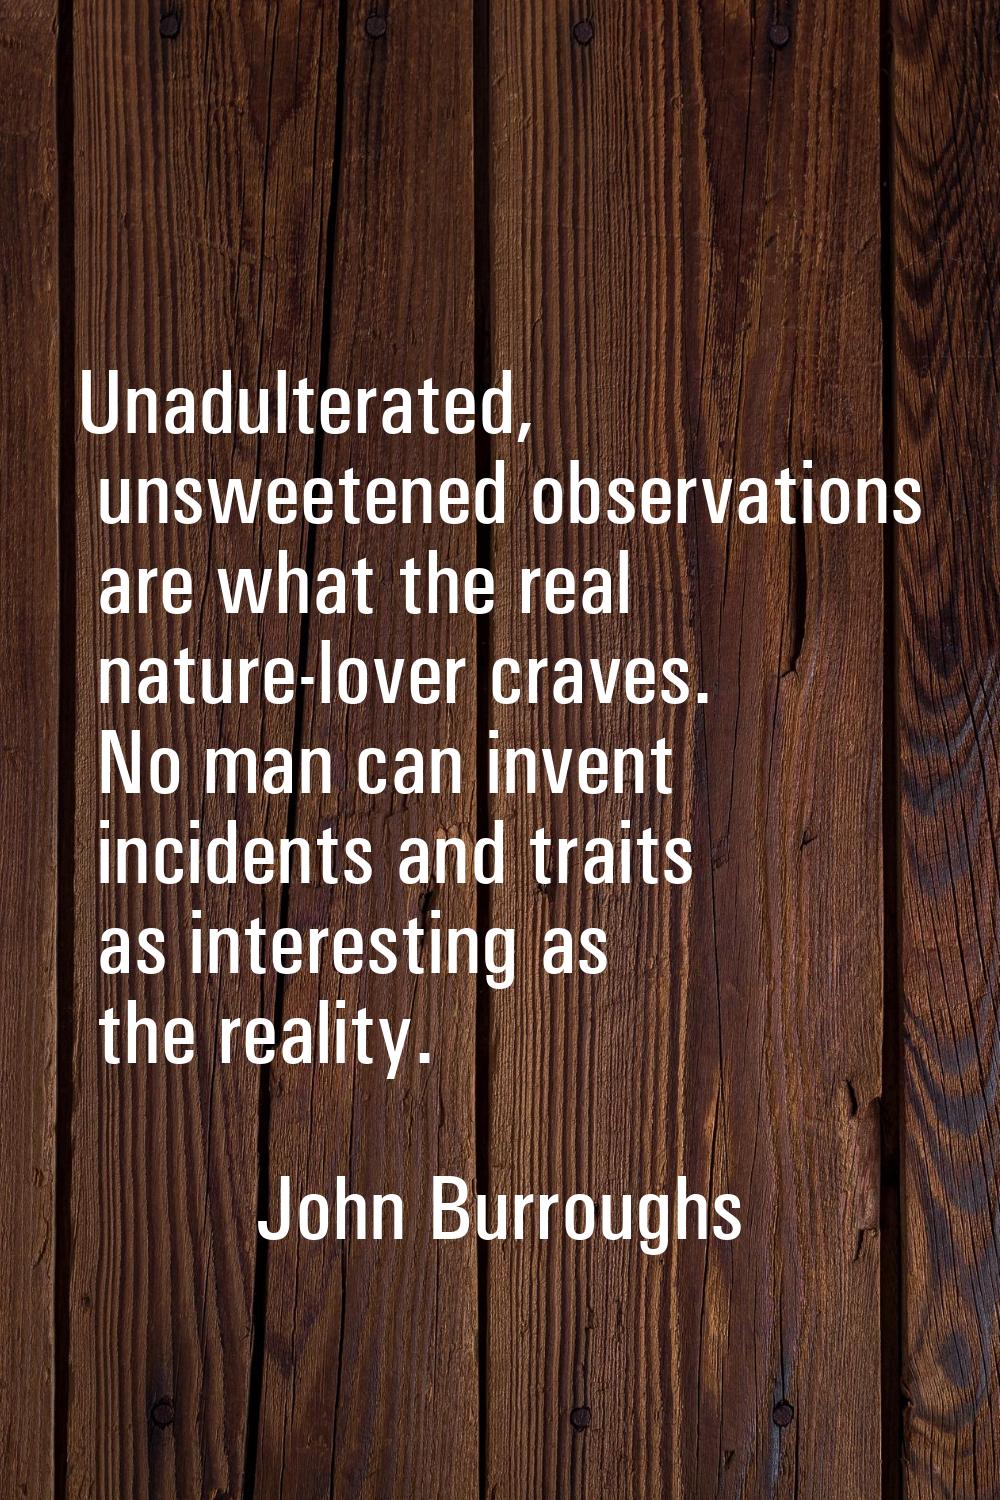 Unadulterated, unsweetened observations are what the real nature-lover craves. No man can invent in